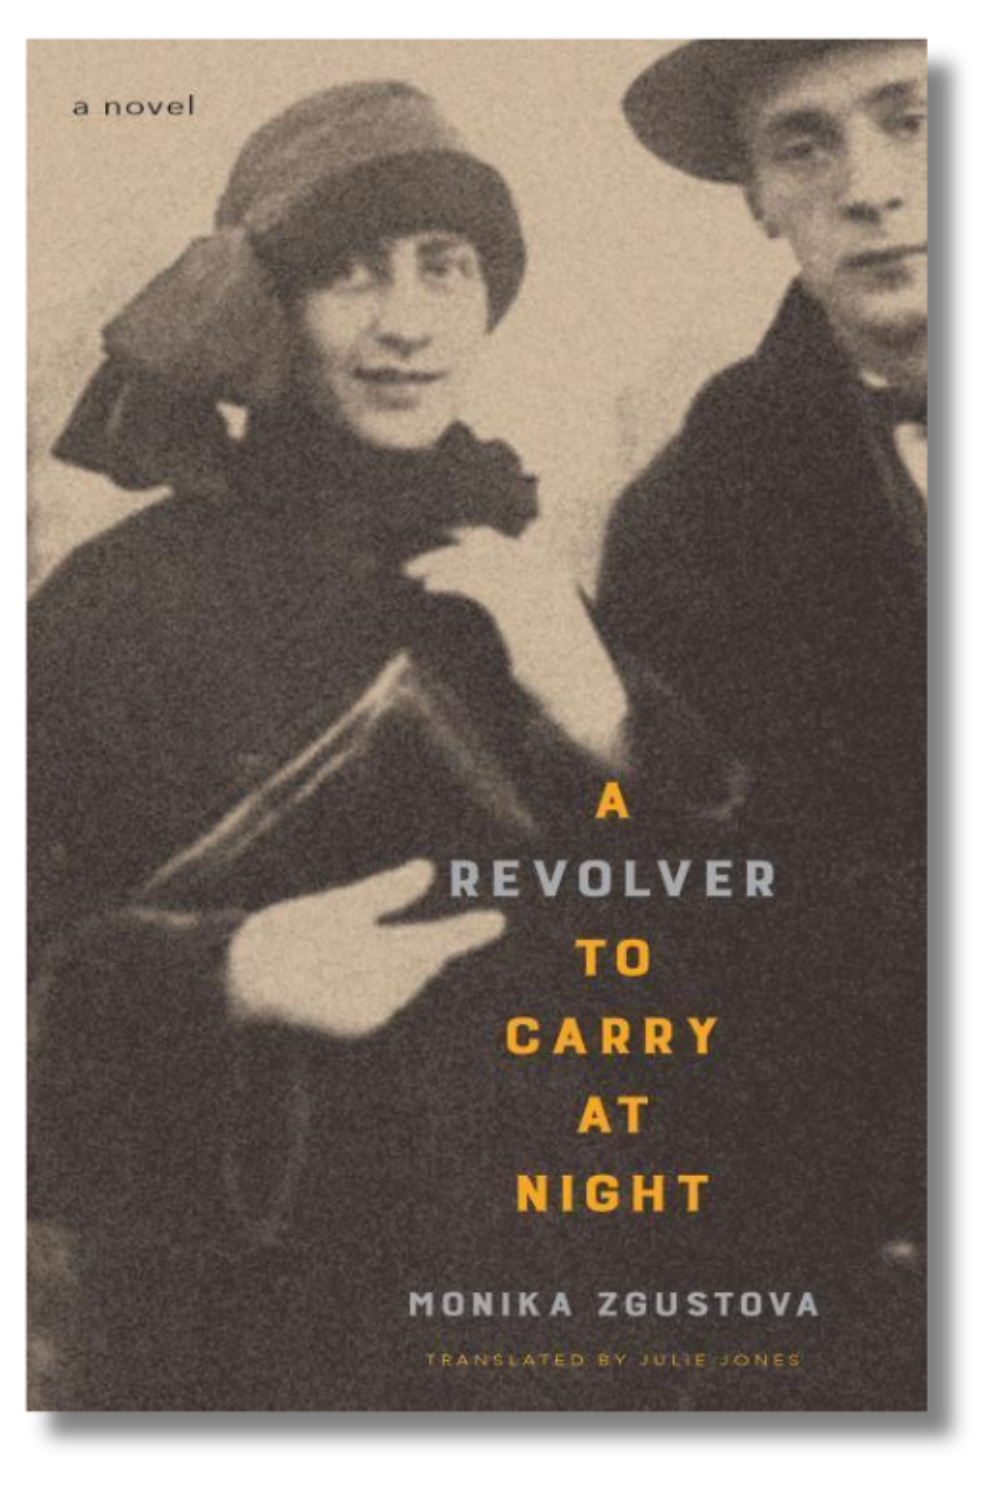 The cover of "A Revolver to Carry at Night" by Monika Zgustova, tr. by Julie Jones